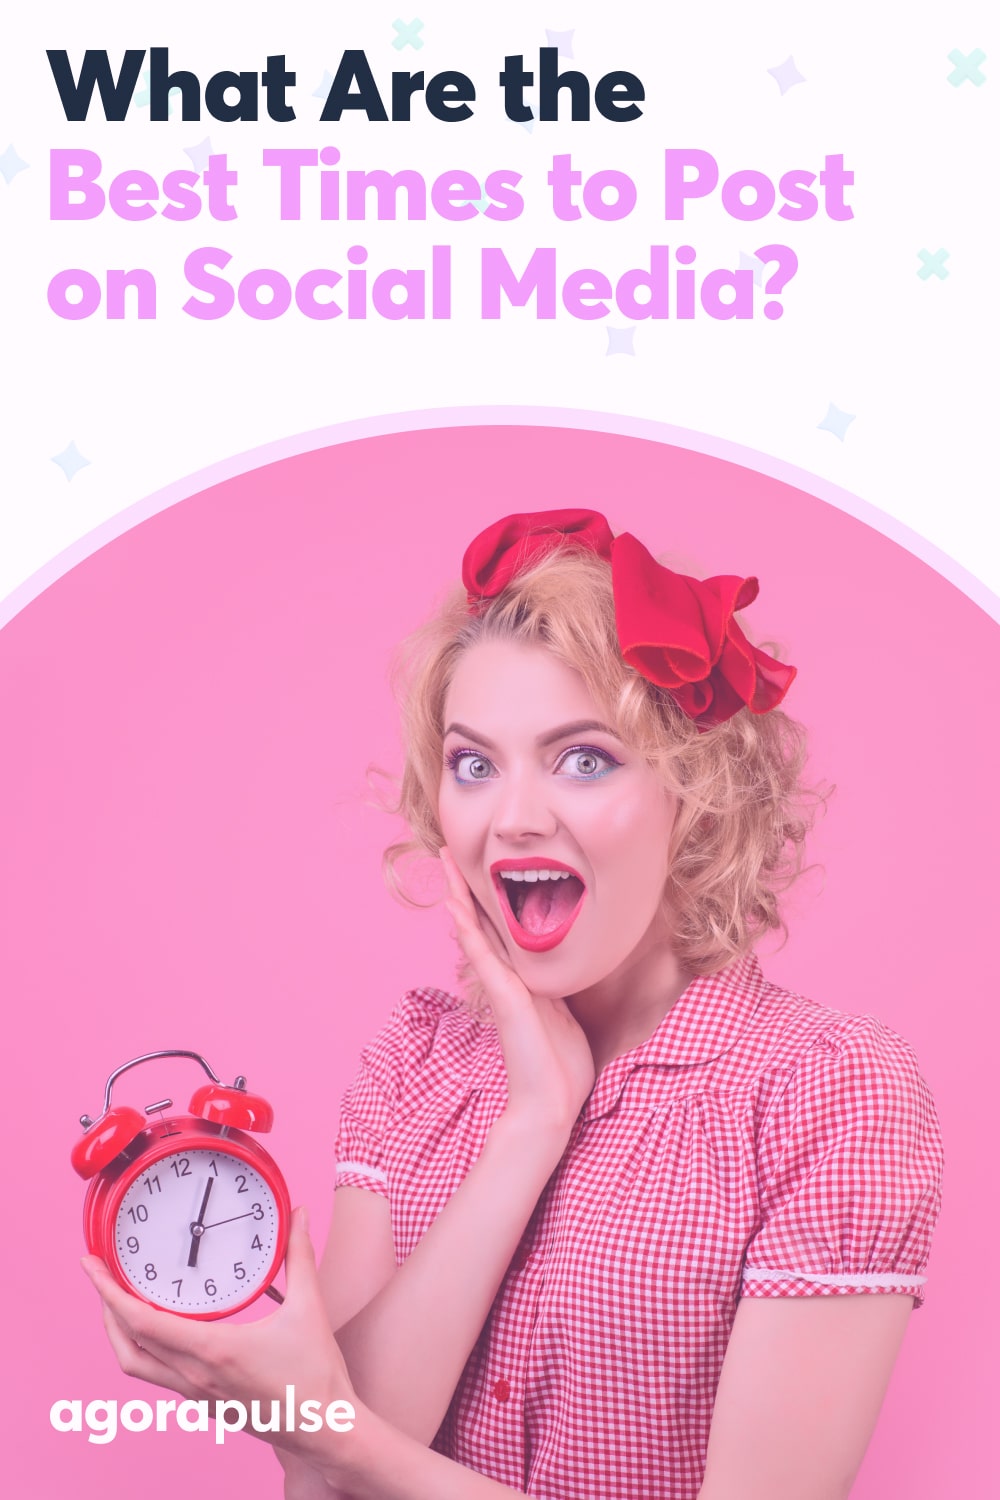 What Are the Best Times to Post on Social Media?